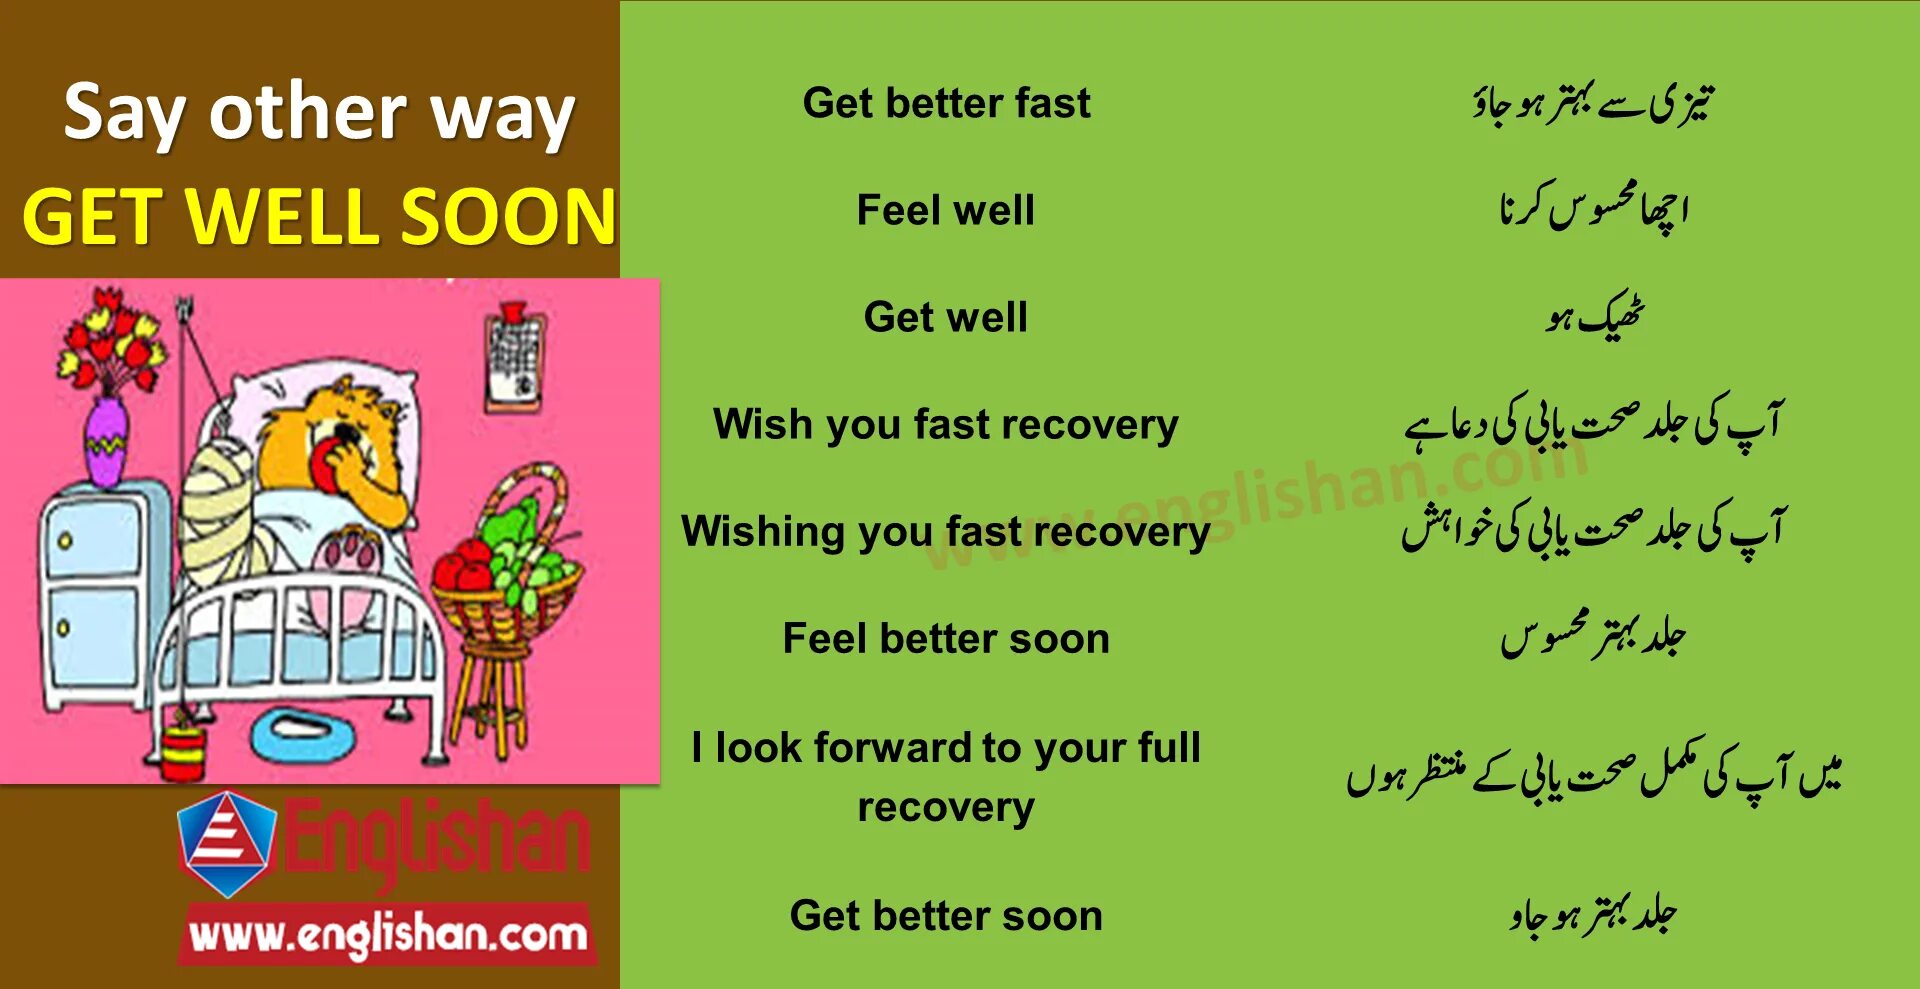 Get better на русском. Get well soon other ways. Get well meaning. Get better meaning. Goodwell meaning.